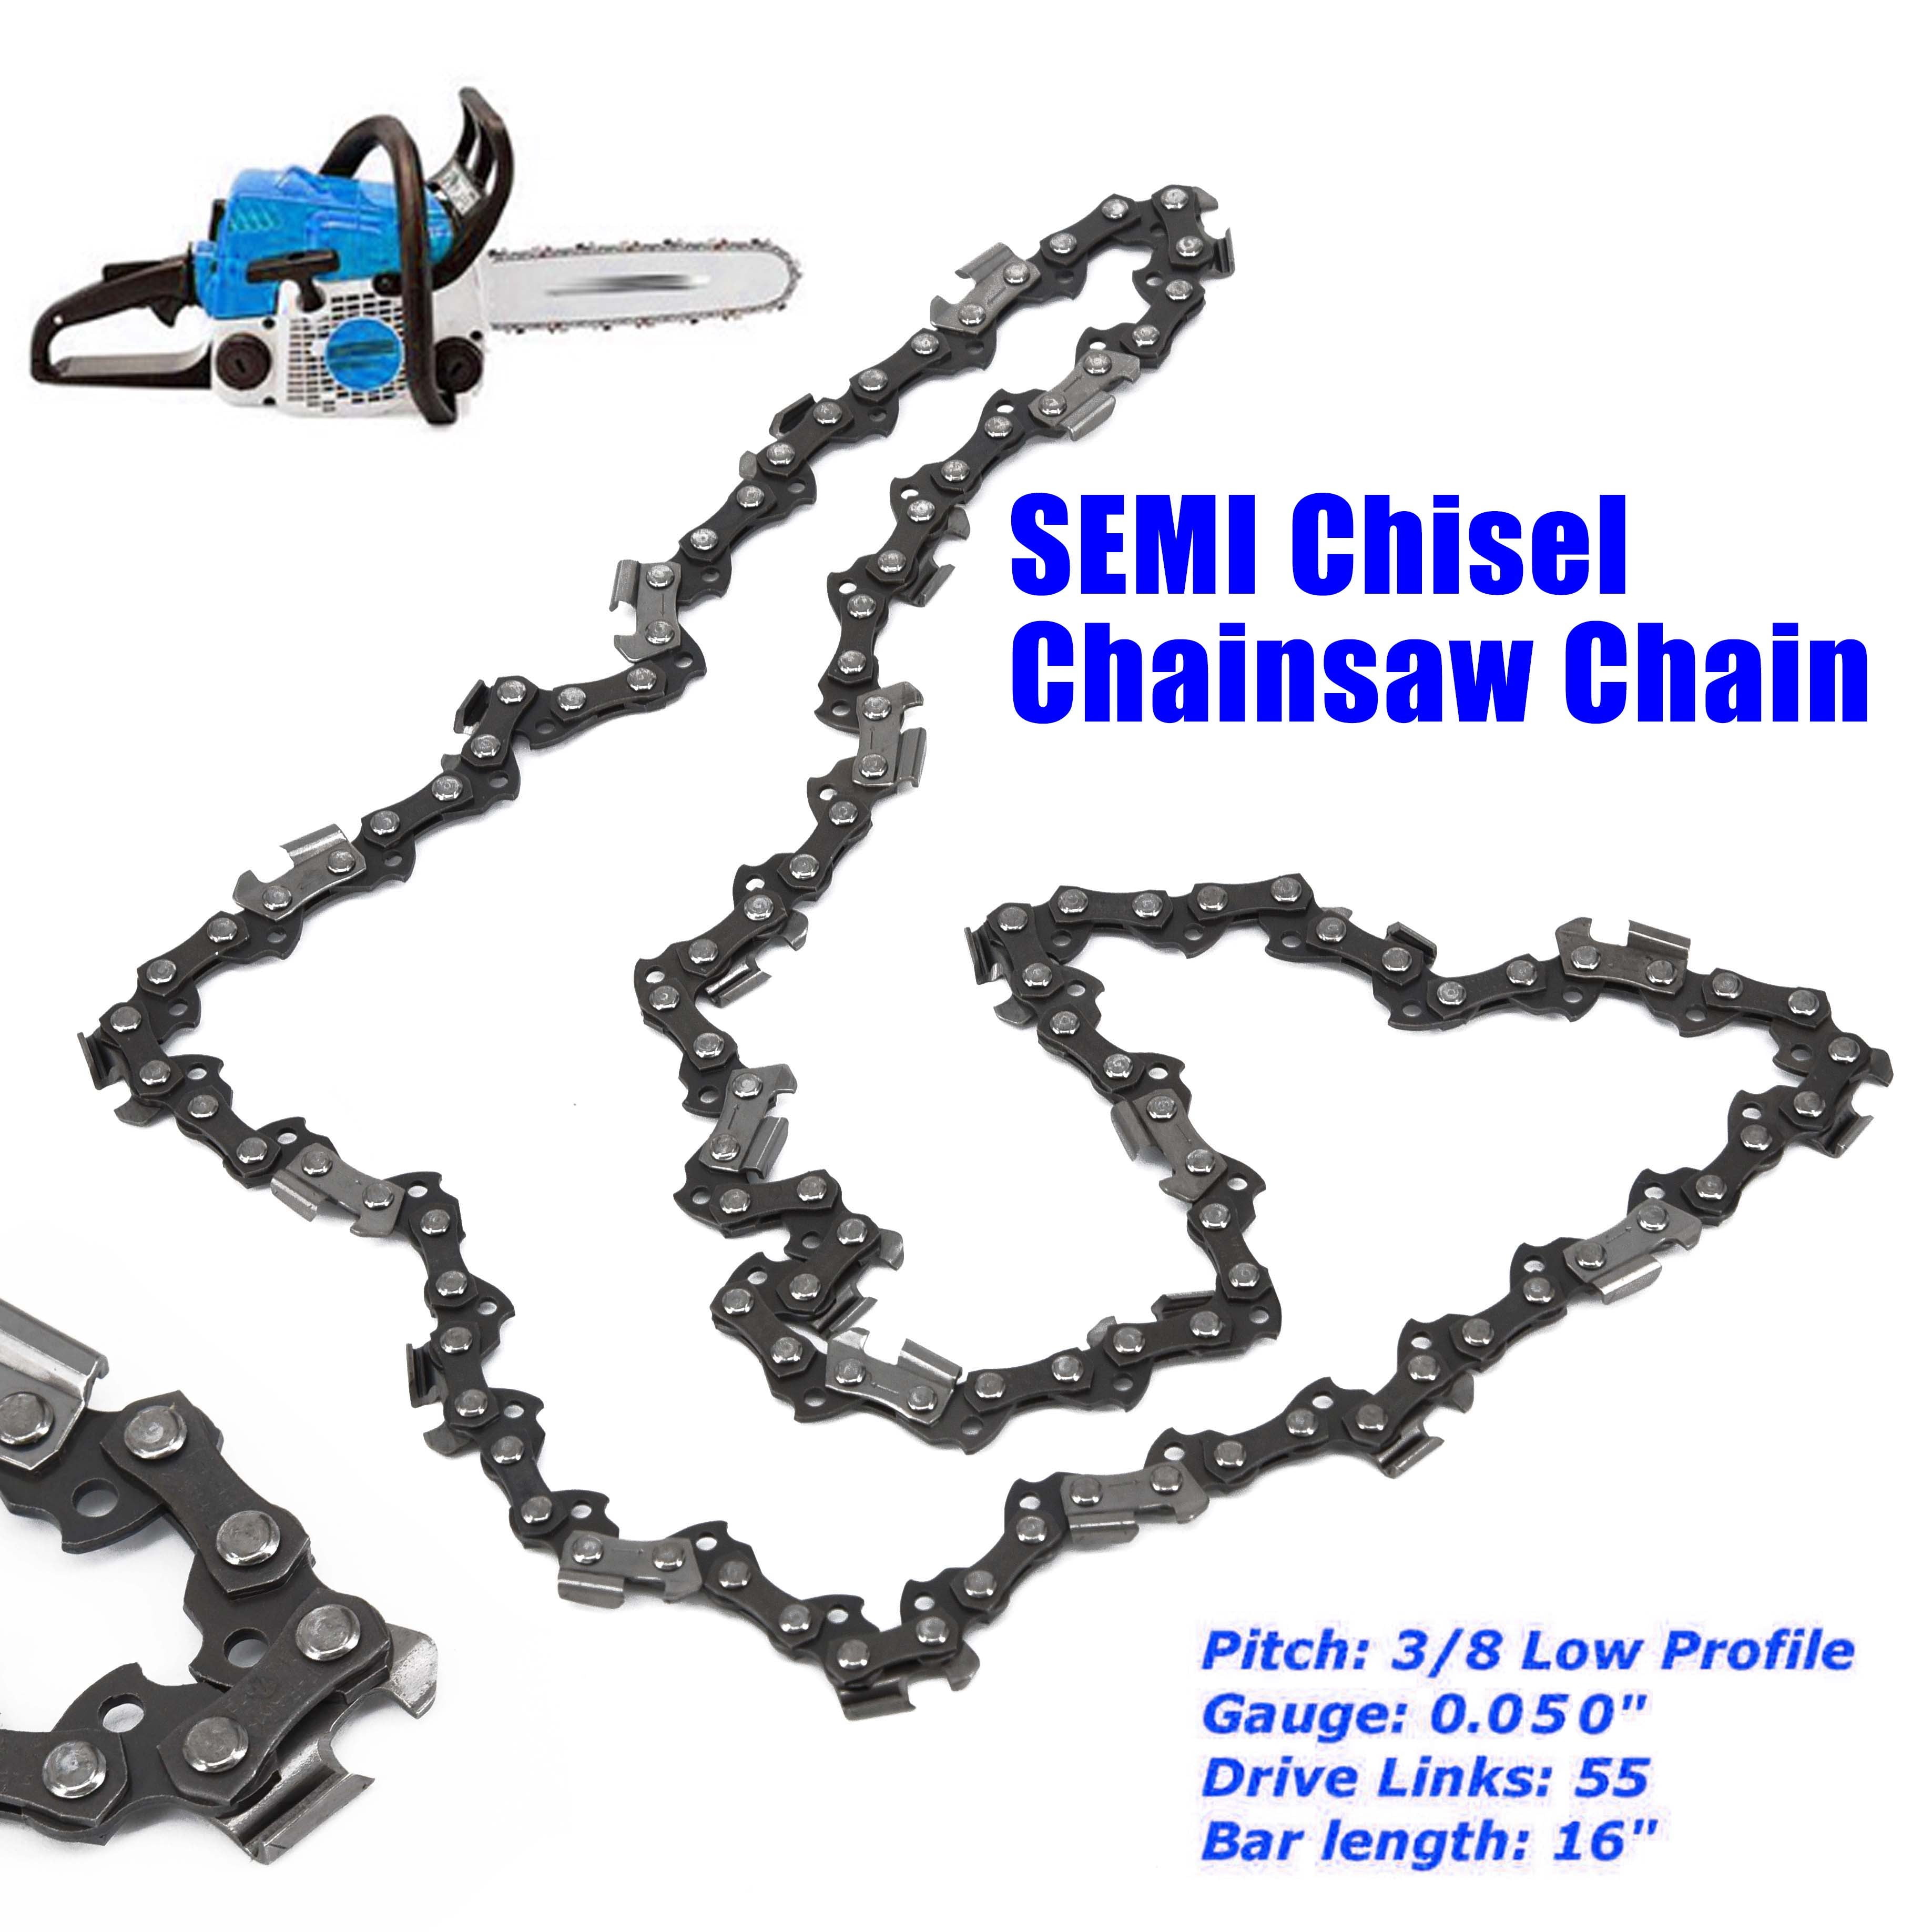 STIHL 3/8 Pitch PS RACING CHAIN 14 inch bar 50 drivers full chisel .050 gauge 